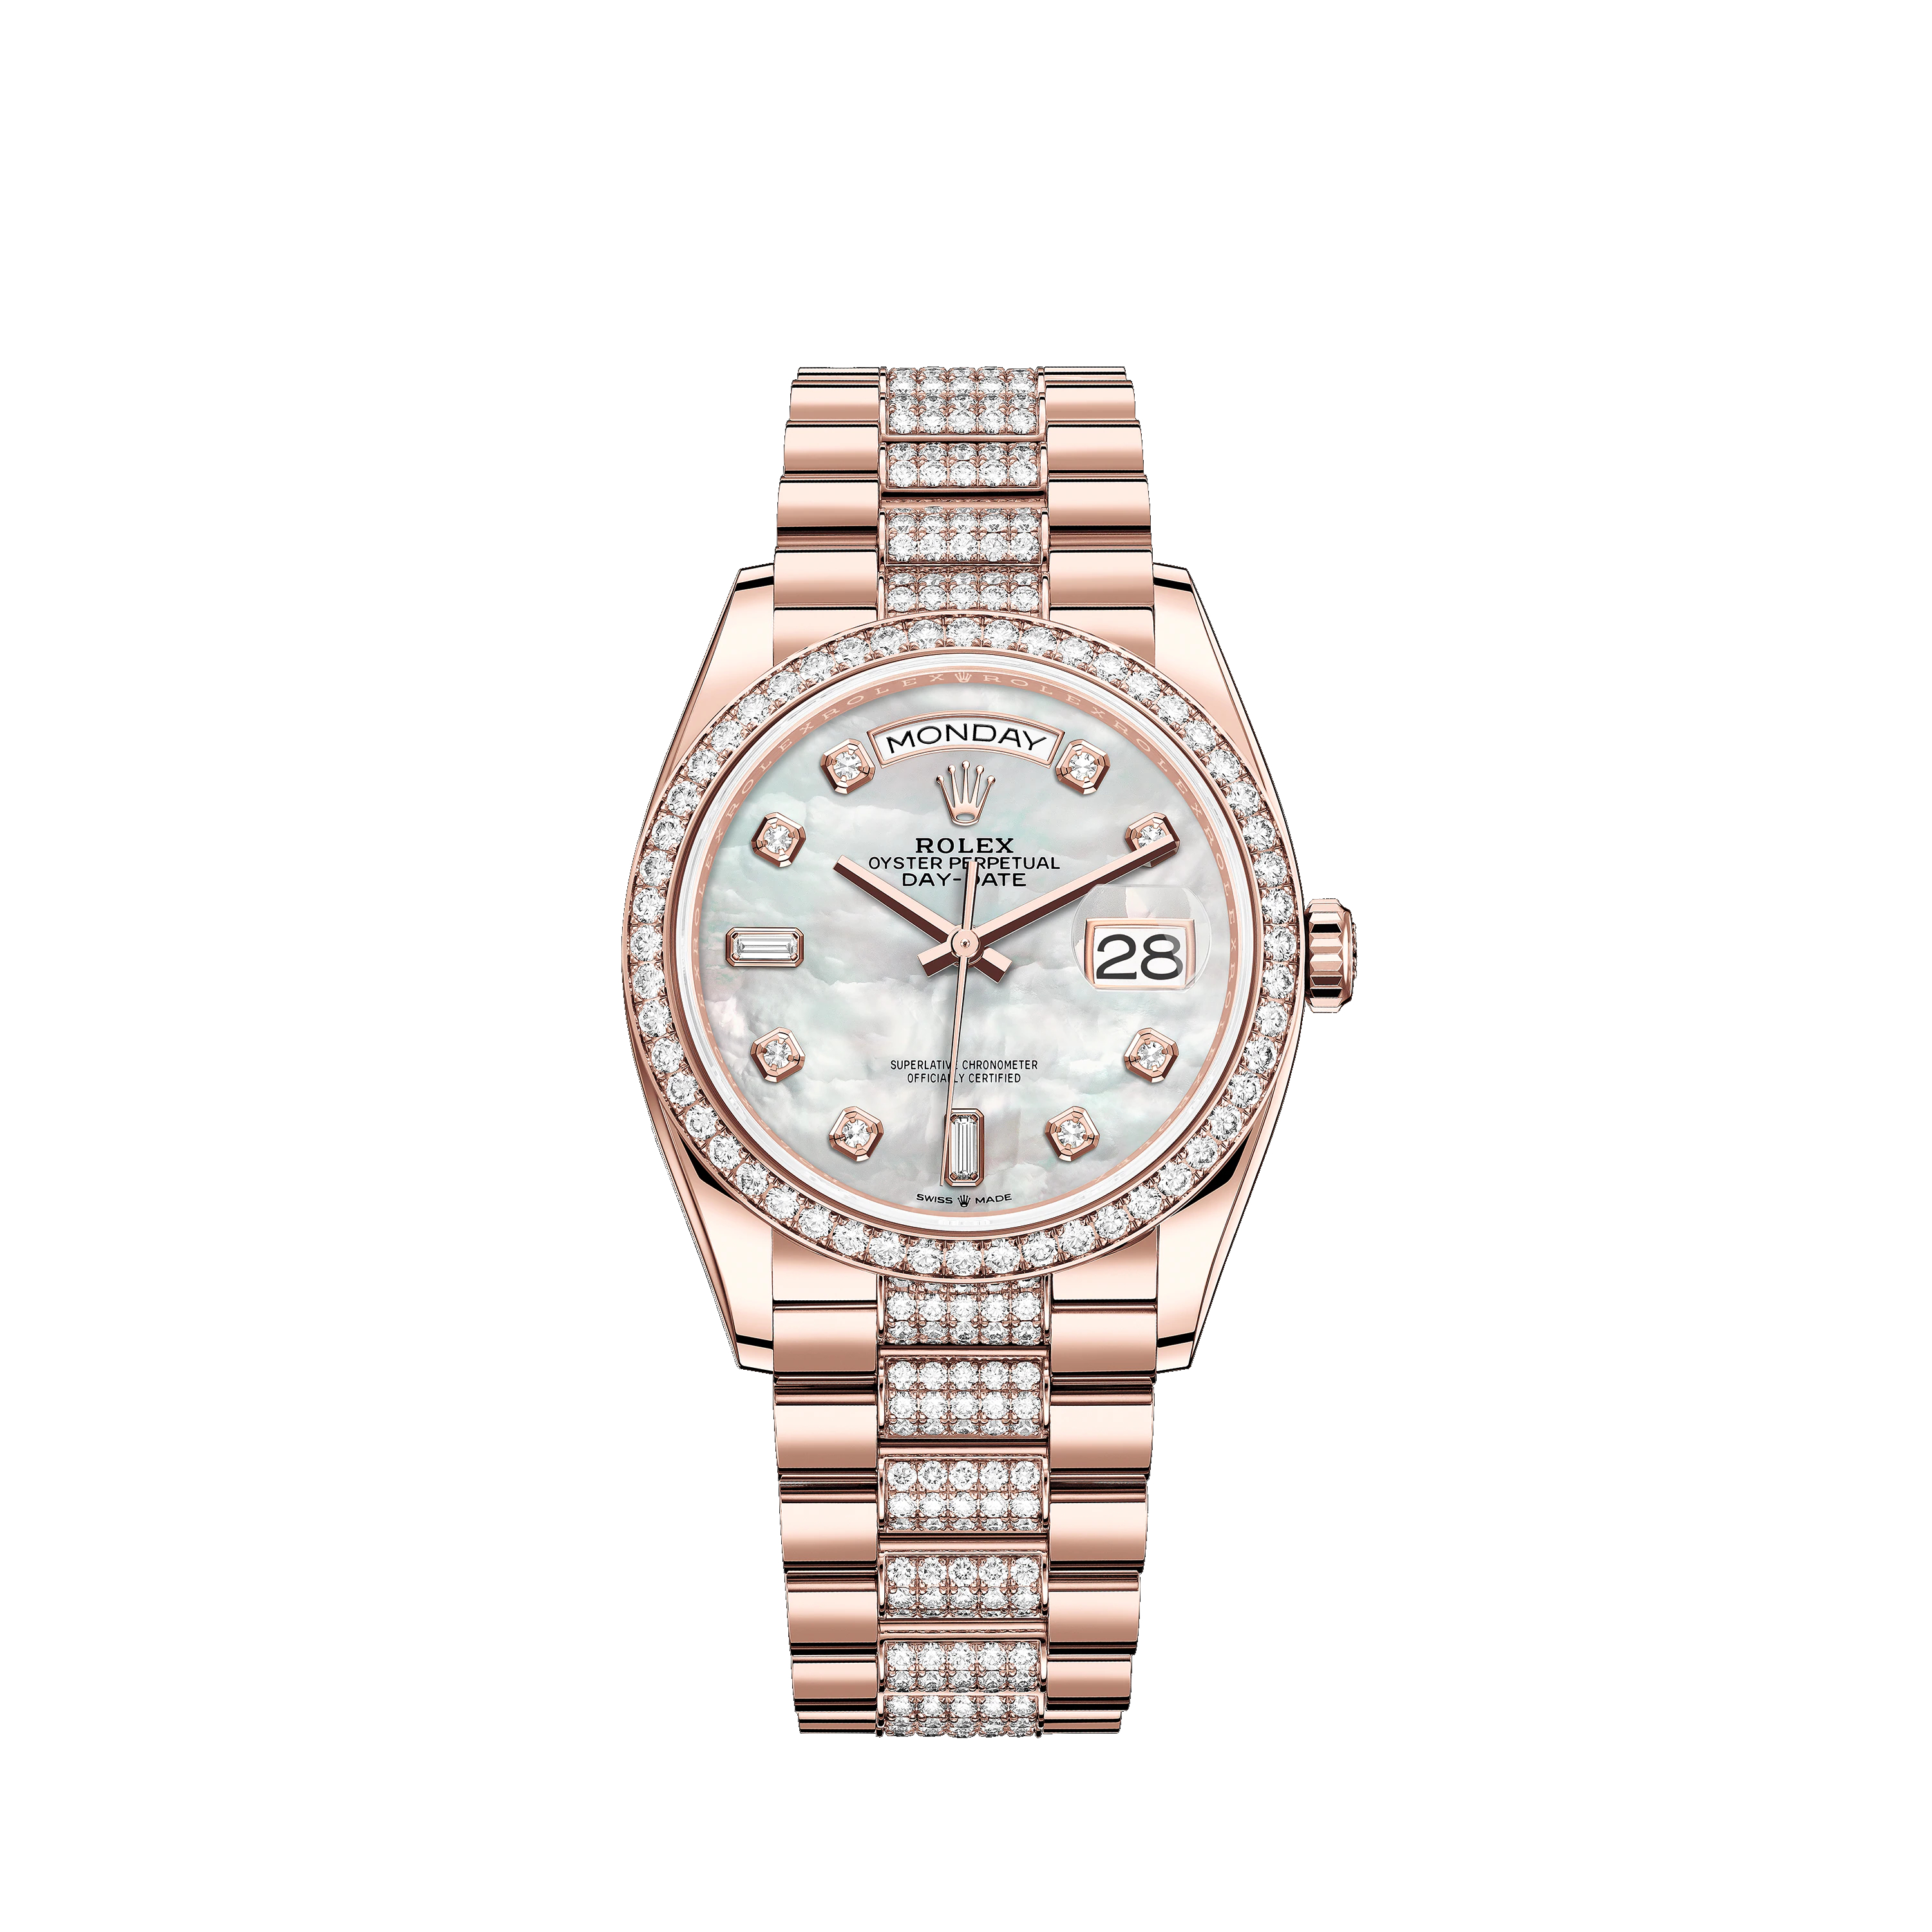 Day-Date 36 128345RBR Rose Gold & Diamonds Watch (White Mother-of-Pearl Set with Diamonds)